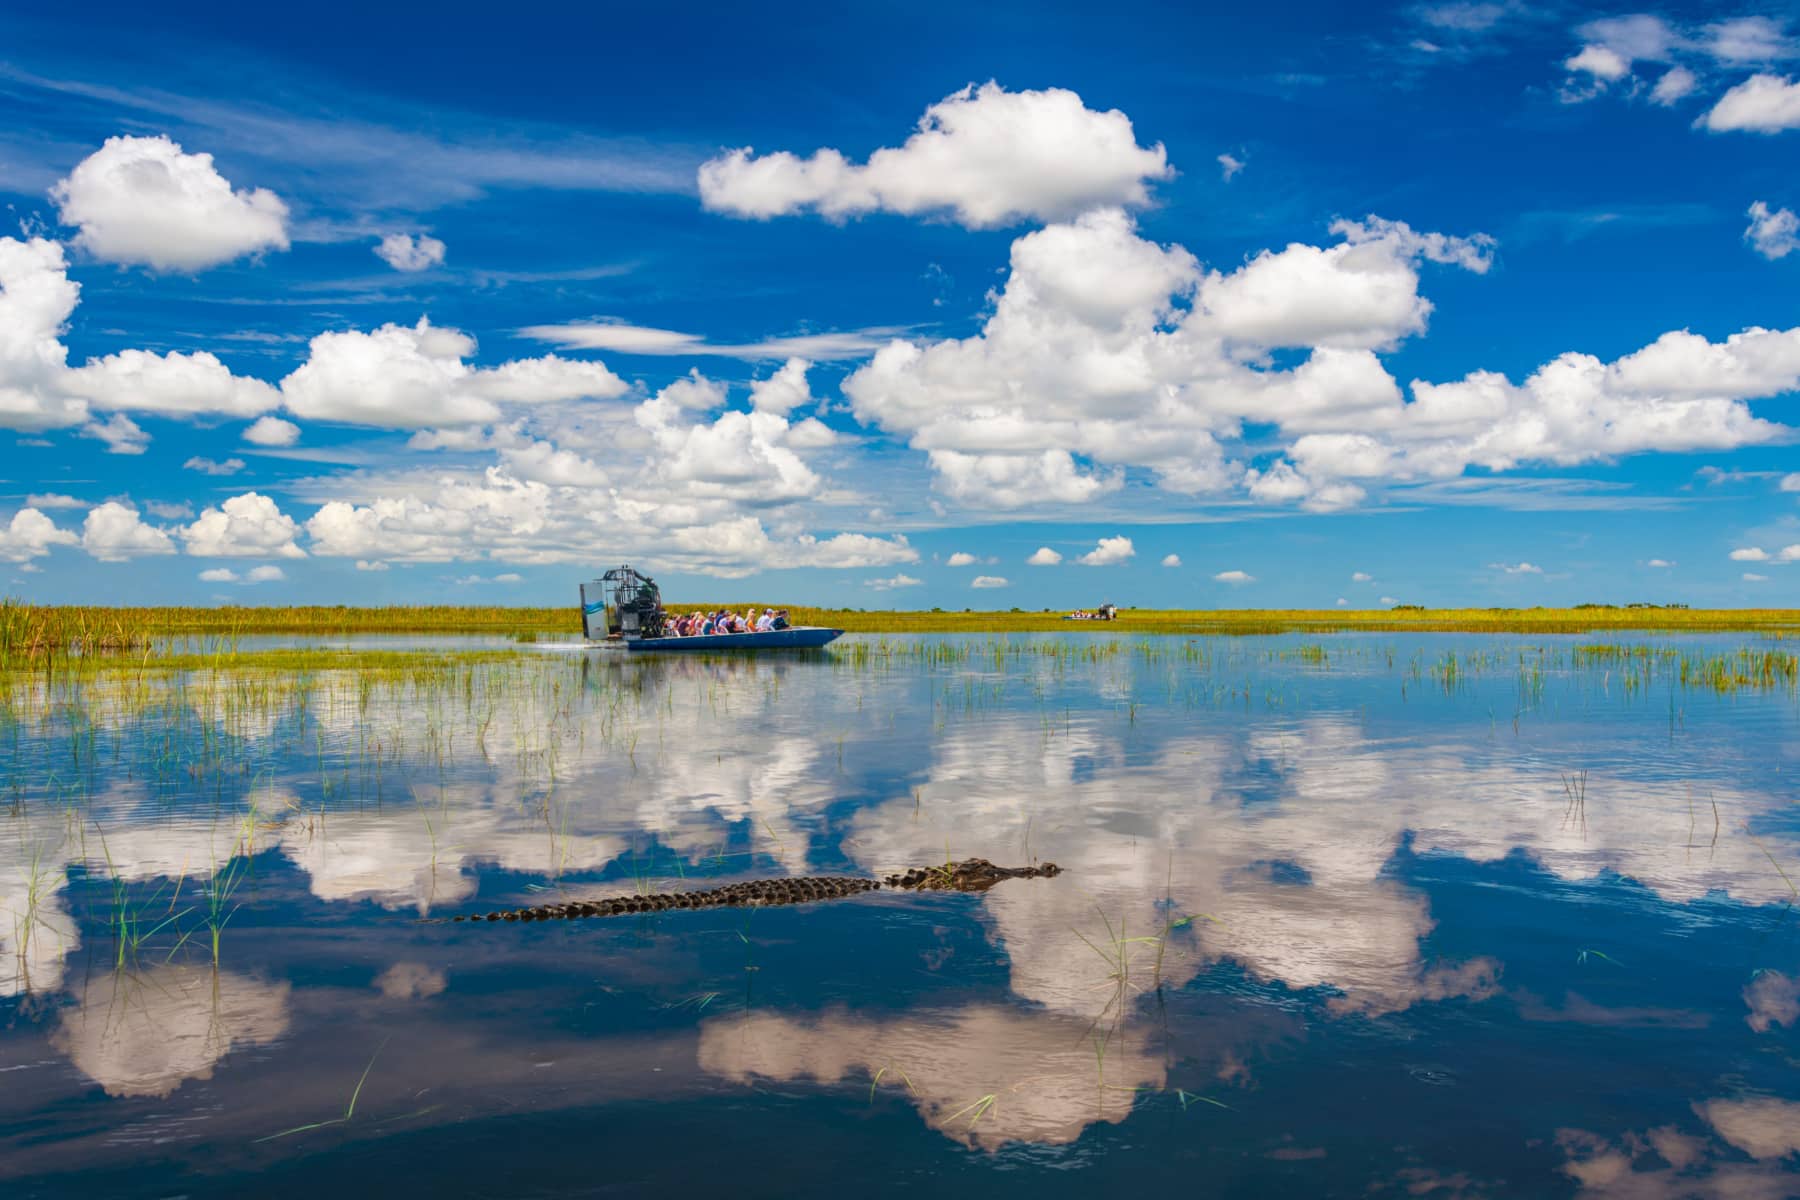 An alligator creeps in the water with an airboat in the distance in Everglades National Park, one of the best national parks in February.